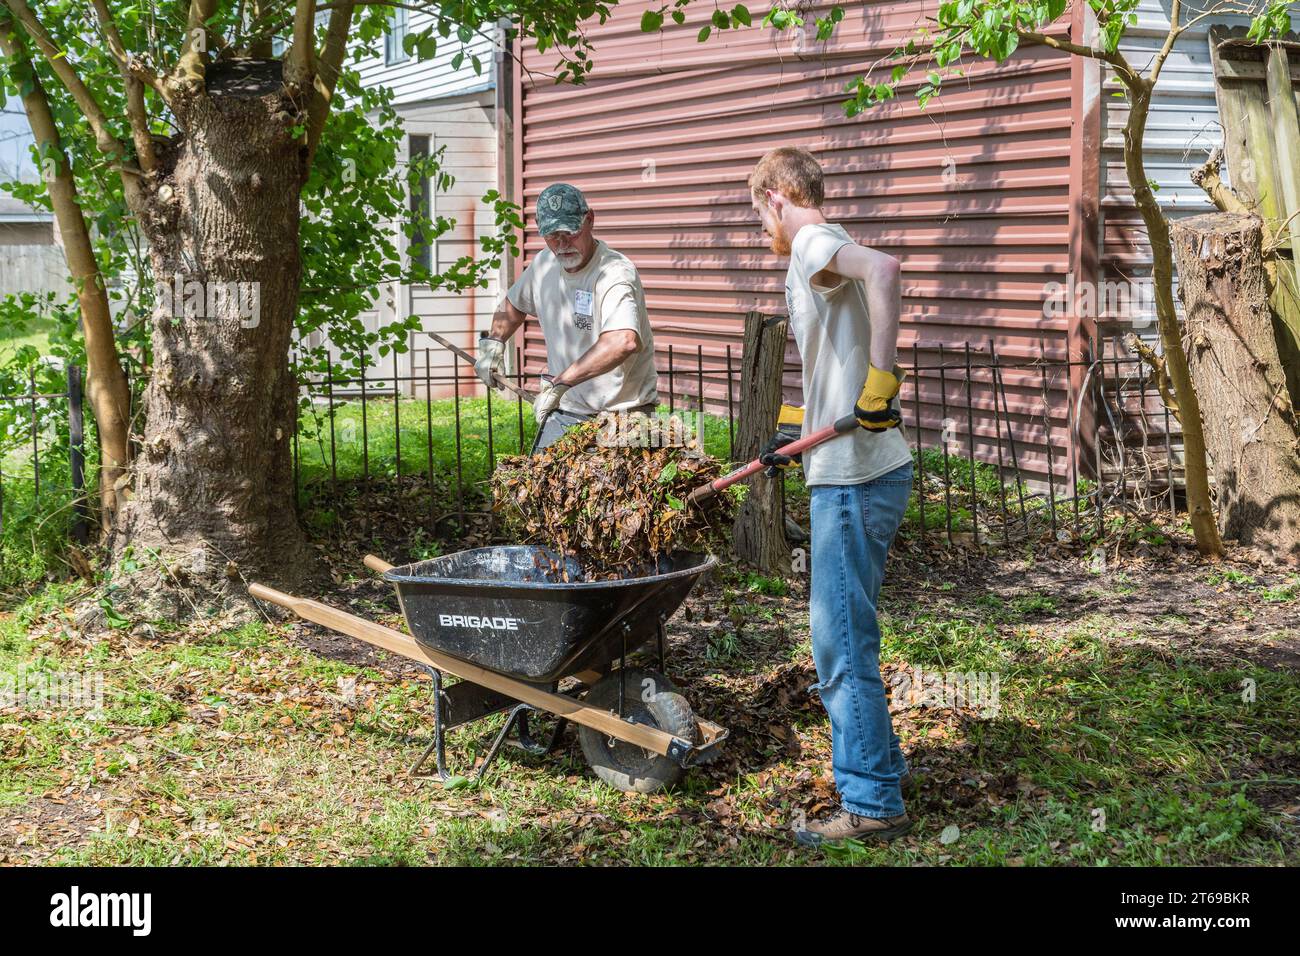 Members of 8 Days of Hope faith based charity volunteer team cleaning up the yard of a home that was flooded in Houston, Texas Stock Photo